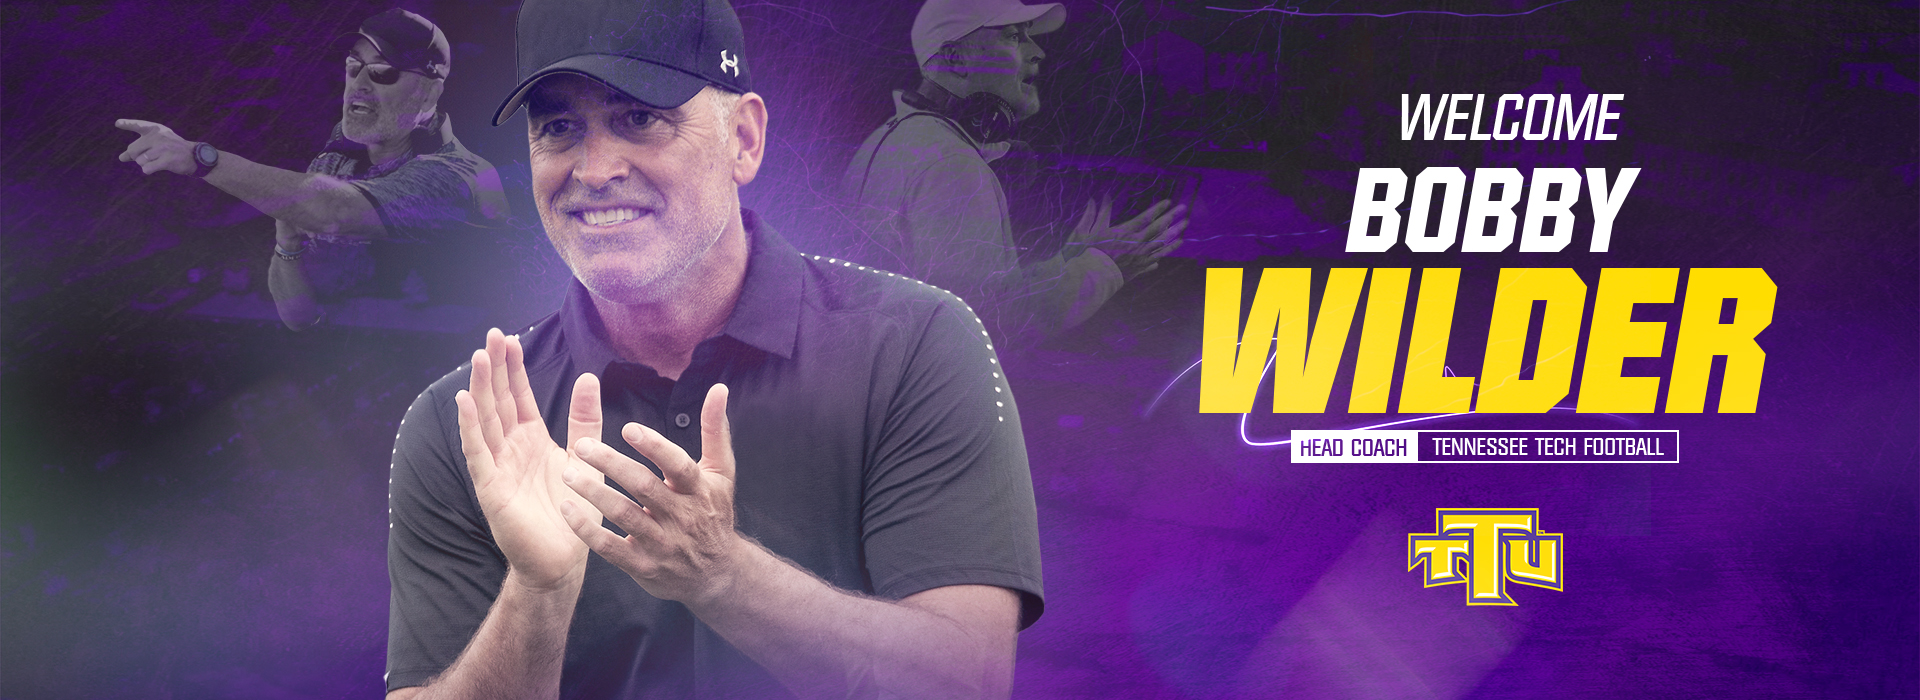 Let's get Wilder: Bobby Wilder named new Tennessee Tech head football coach